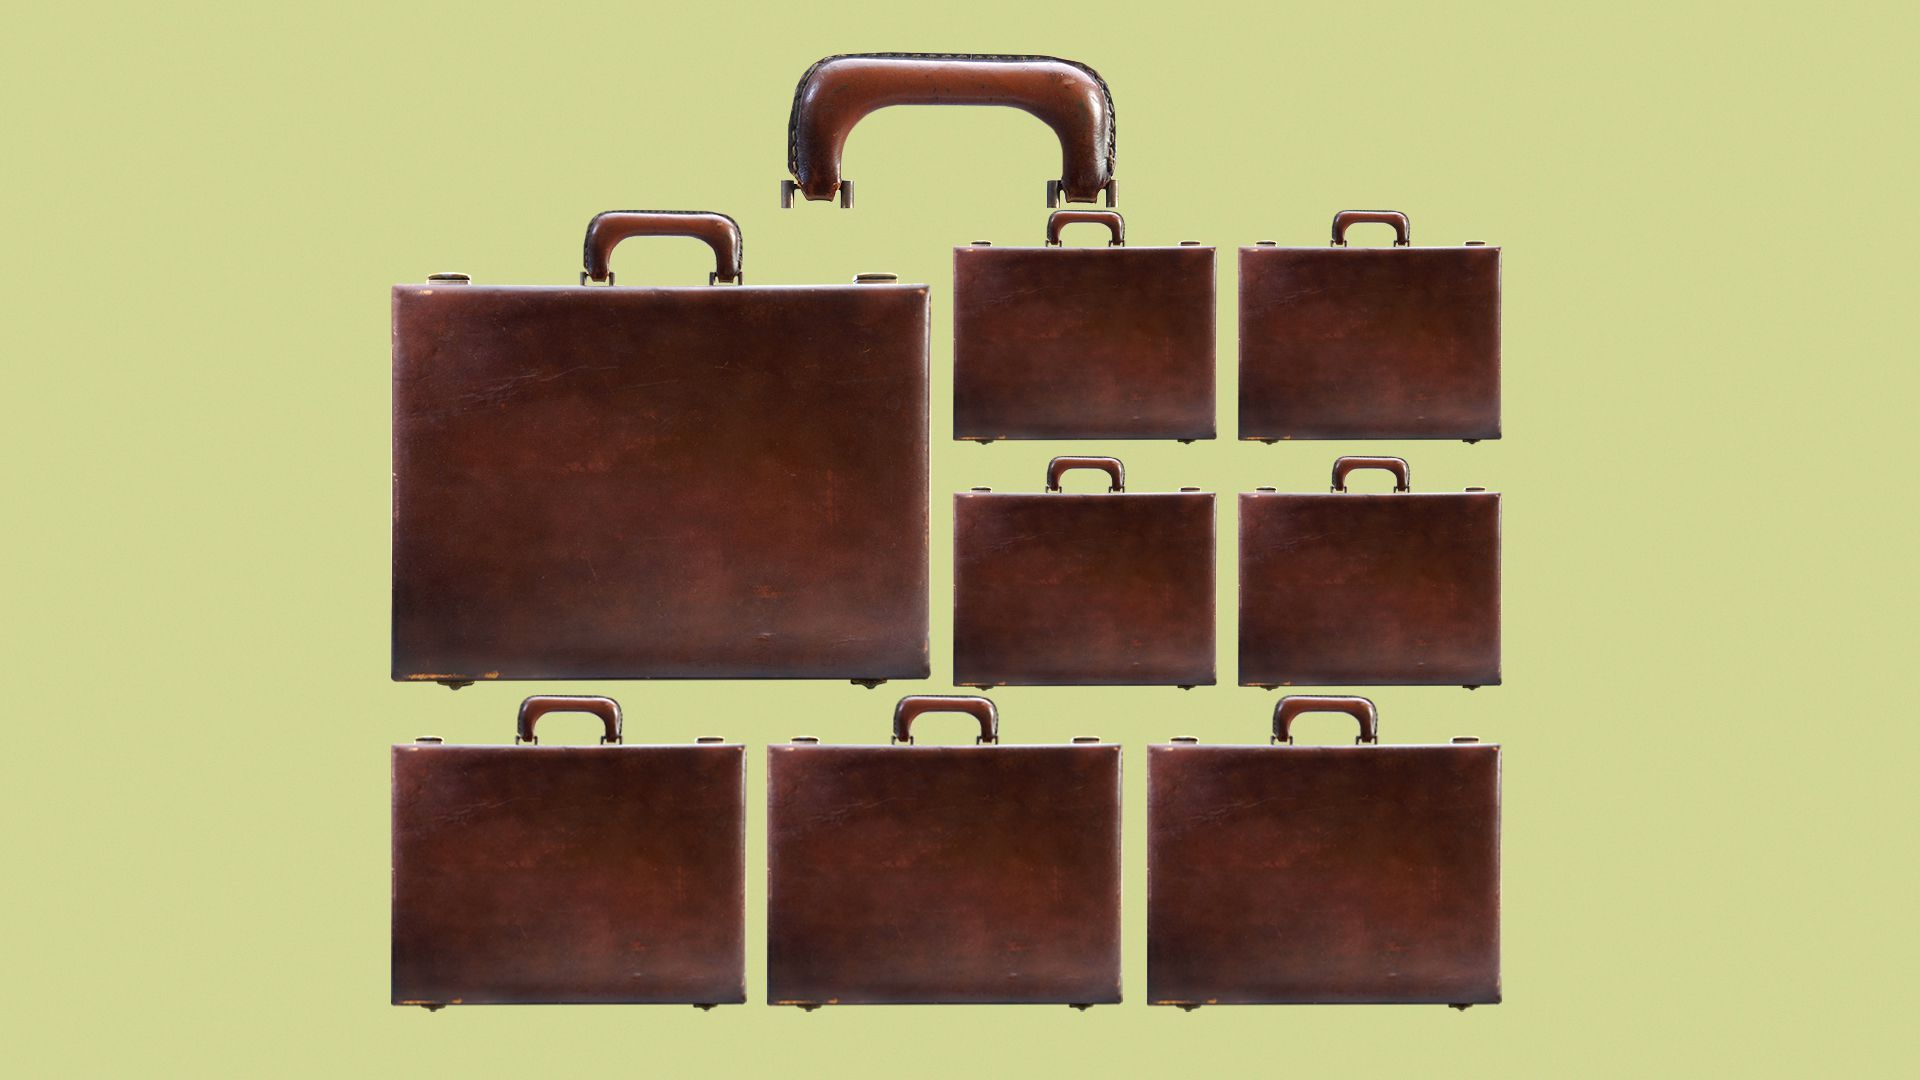 Illustration of a shape of a briefcase compiled of numerous smaller briefcases